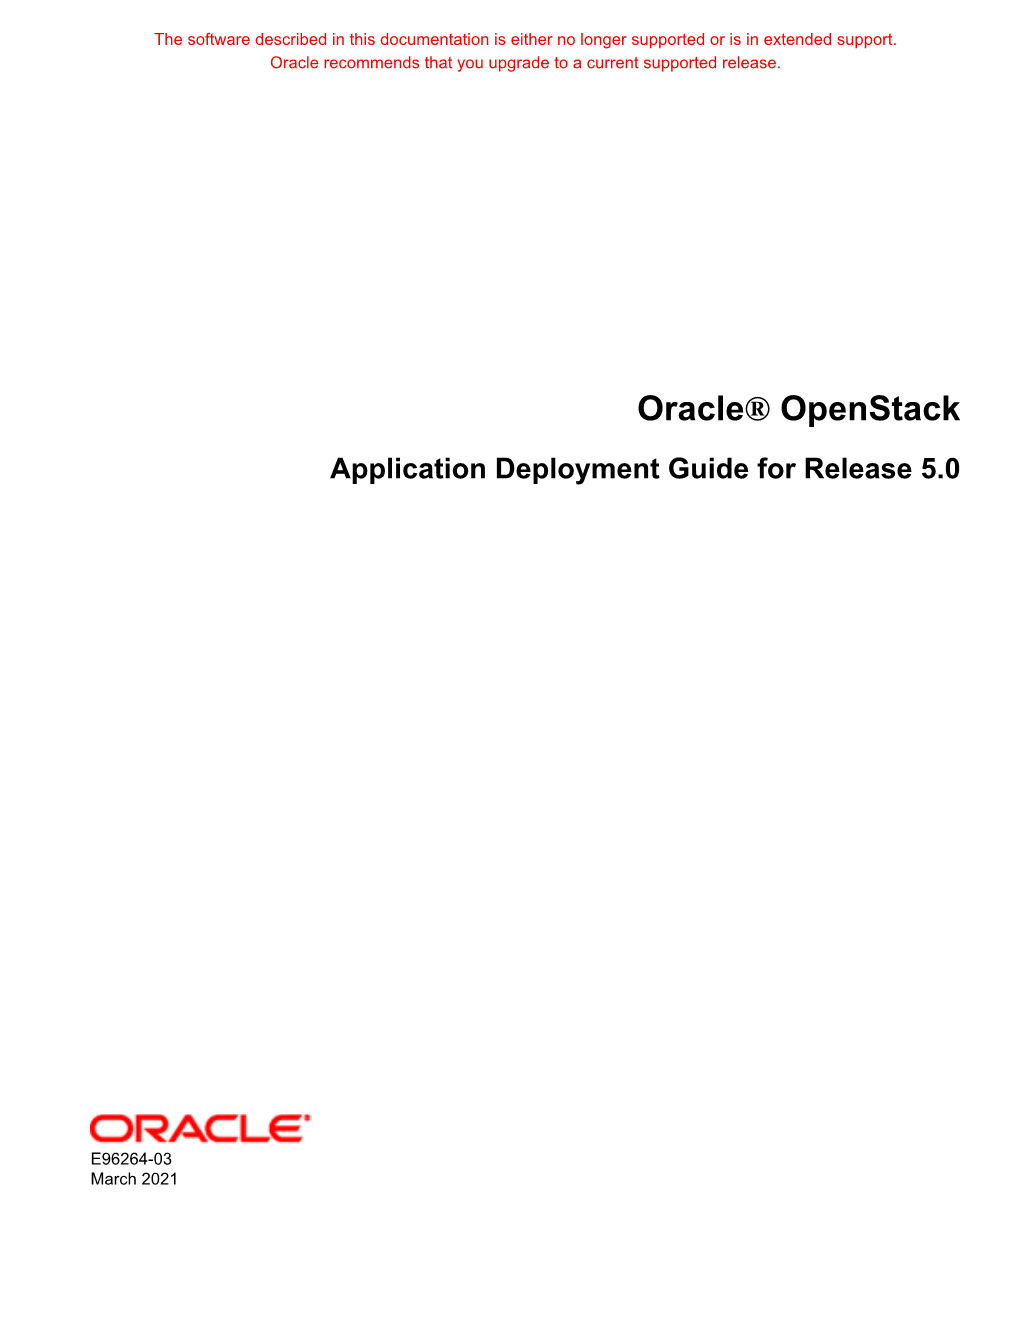 Oracle® Openstack Application Deployment Guide for Release 5.0